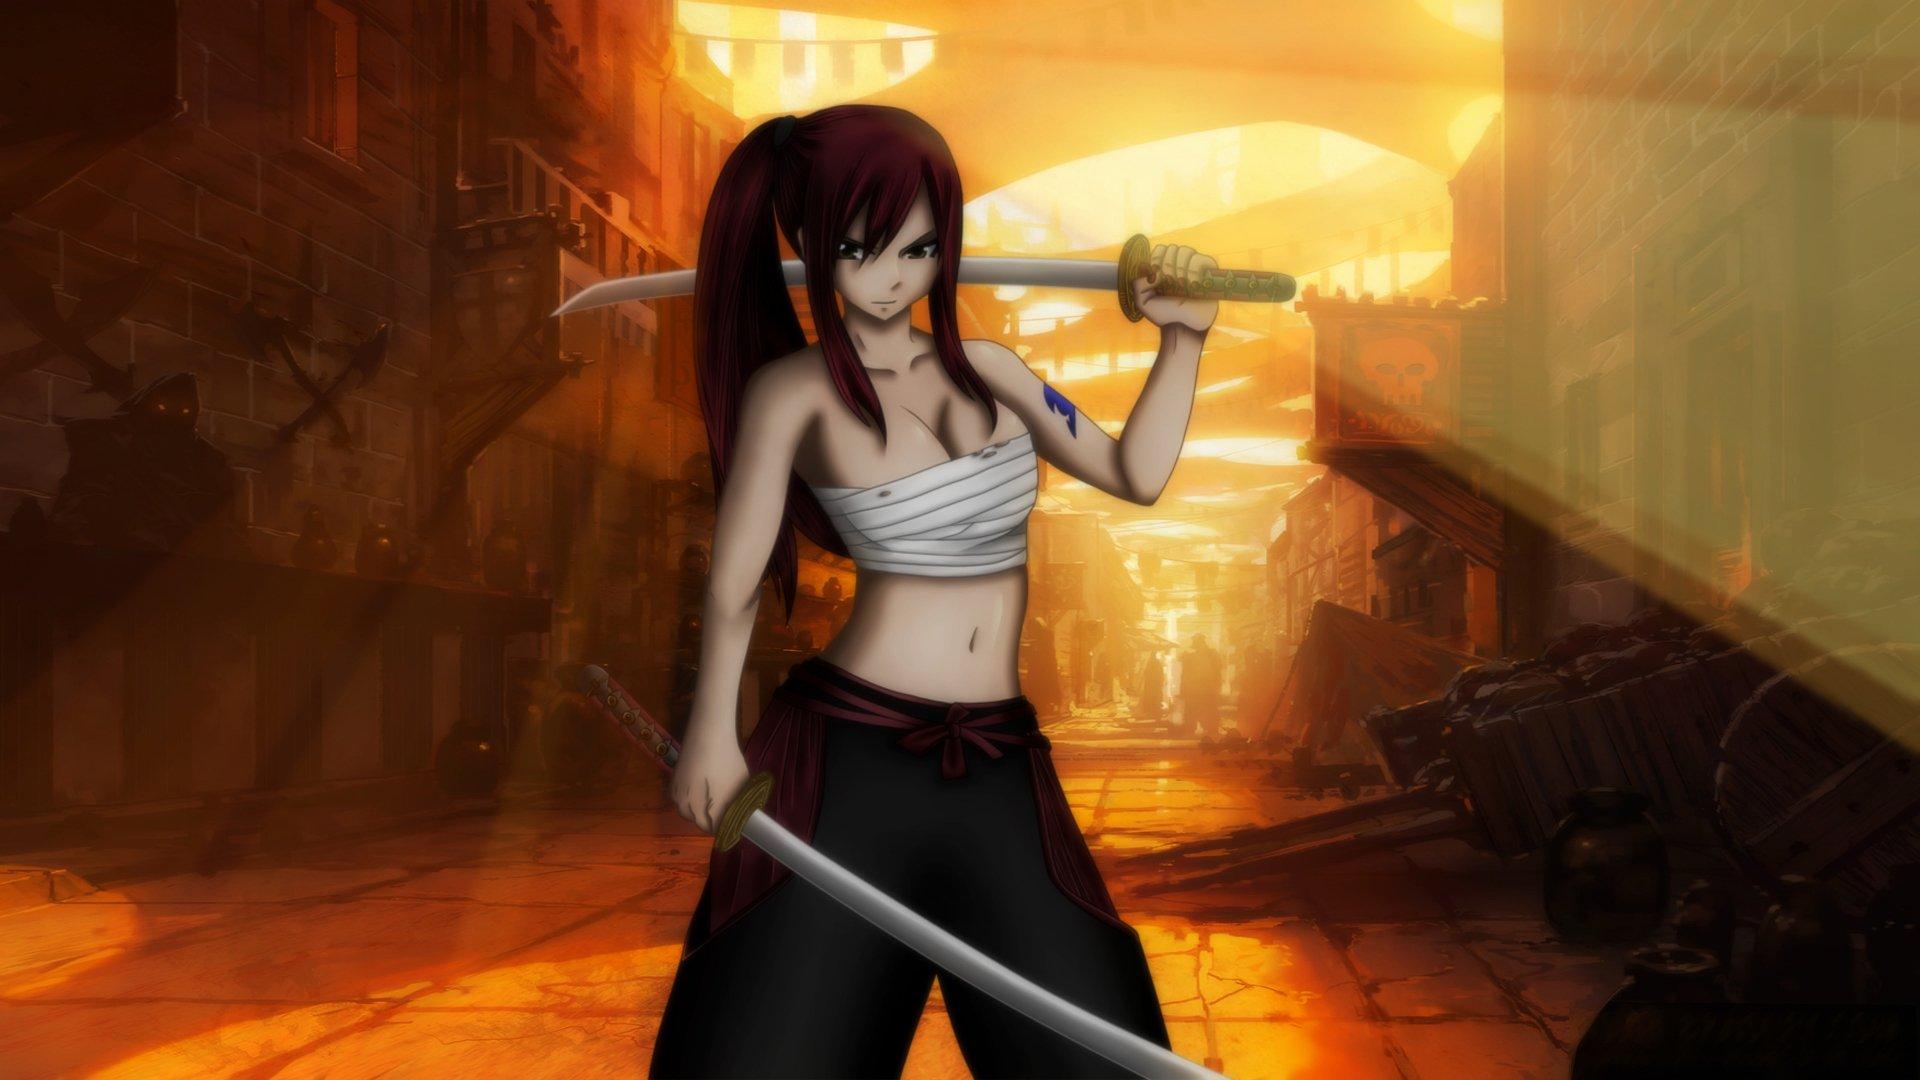 1920 x 1080 · jpeg - Erza Scarlet - Town + Light Effect Full HD Wallpaper and Background ...